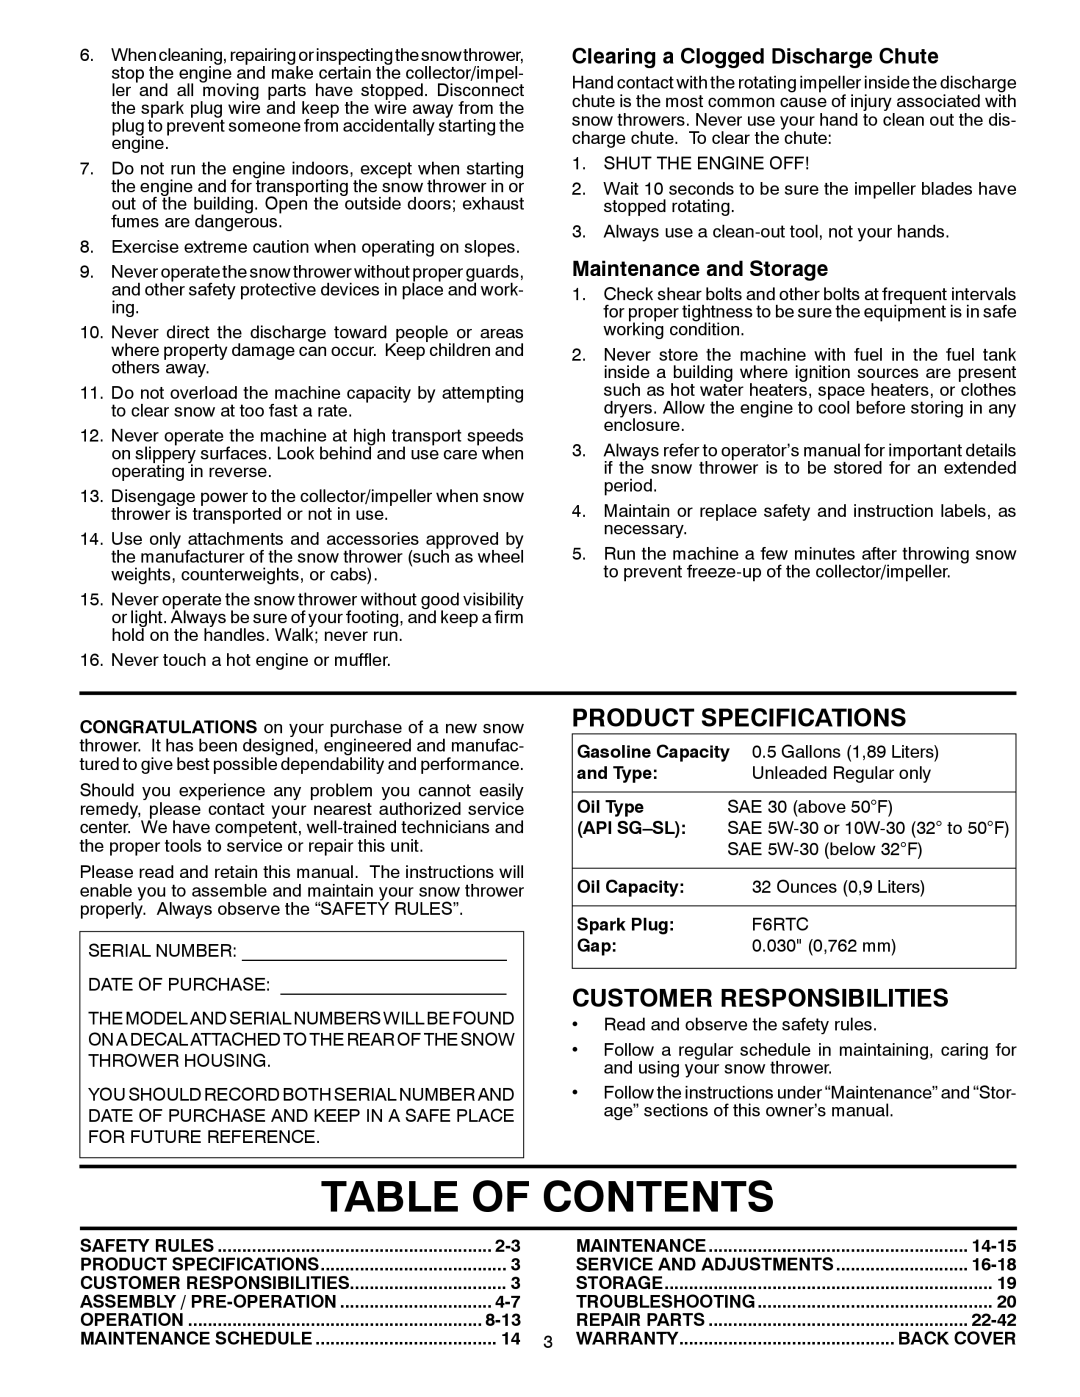 Poulan 96198002901 Table Of Contents, Product Specifications, Customer Responsibilities, Maintenance and Storage, Oil Type 